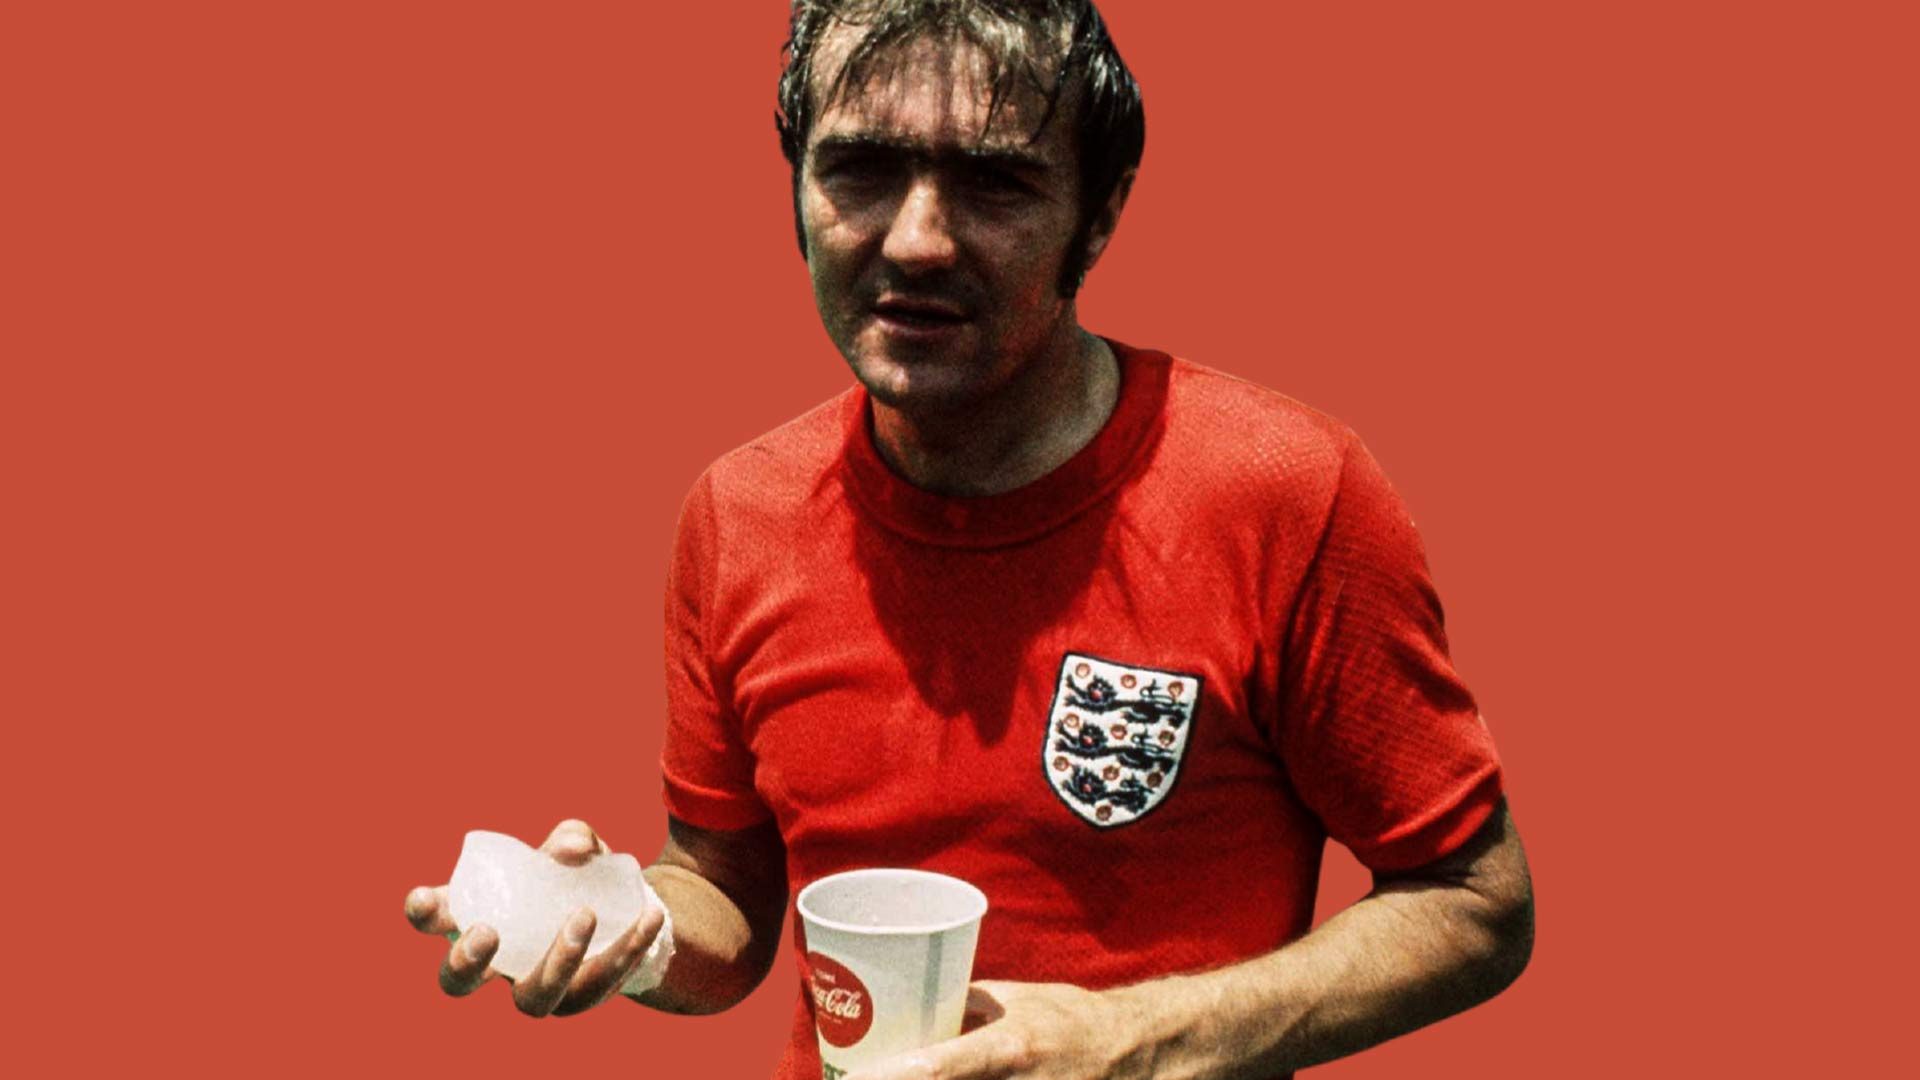 Terry Cooper, holding a block of ice in one hand and a paper Coca-Cola cup in the other, wearing England's red away kit at the 1970 World Cup, sweating a lot